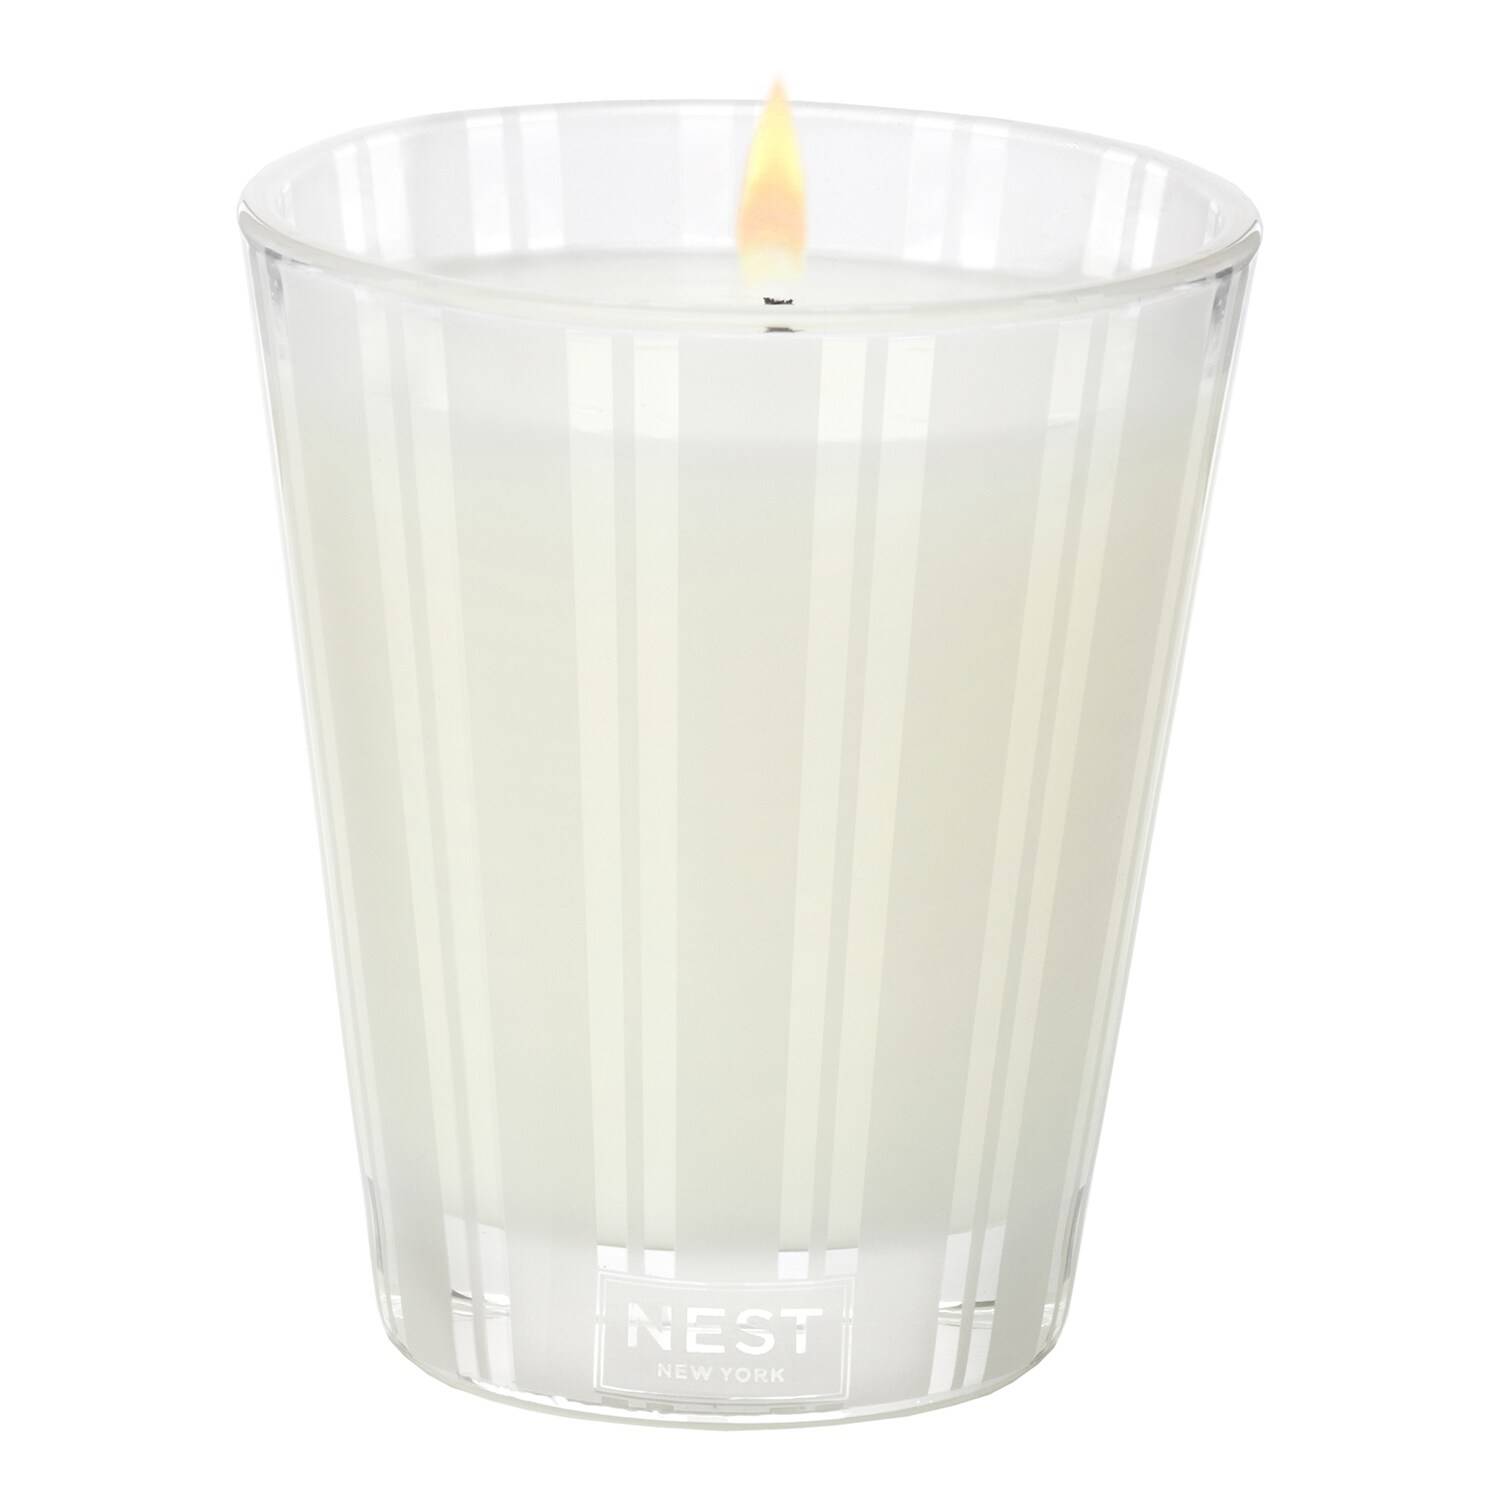 Nest New York Coconut & Palm Classic Candle 230G